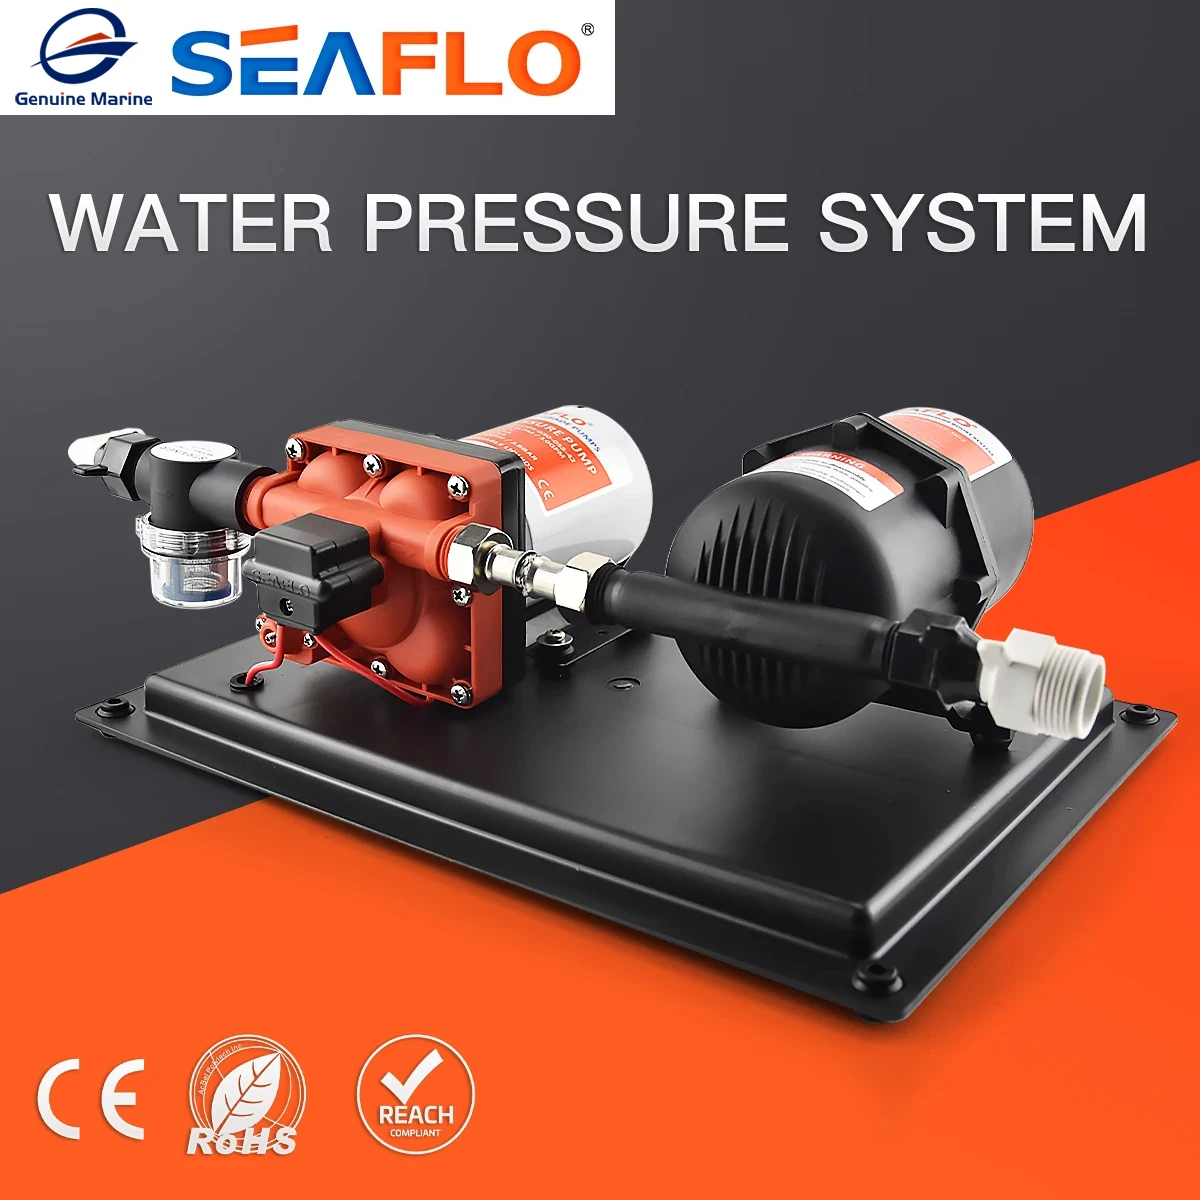 

SEAFLO 42 Series Diaphragm Pump 3GPM Water Supply Pressure System Tank Large Flow 12V Self Priming Pump for RV Boat Yacht Stable